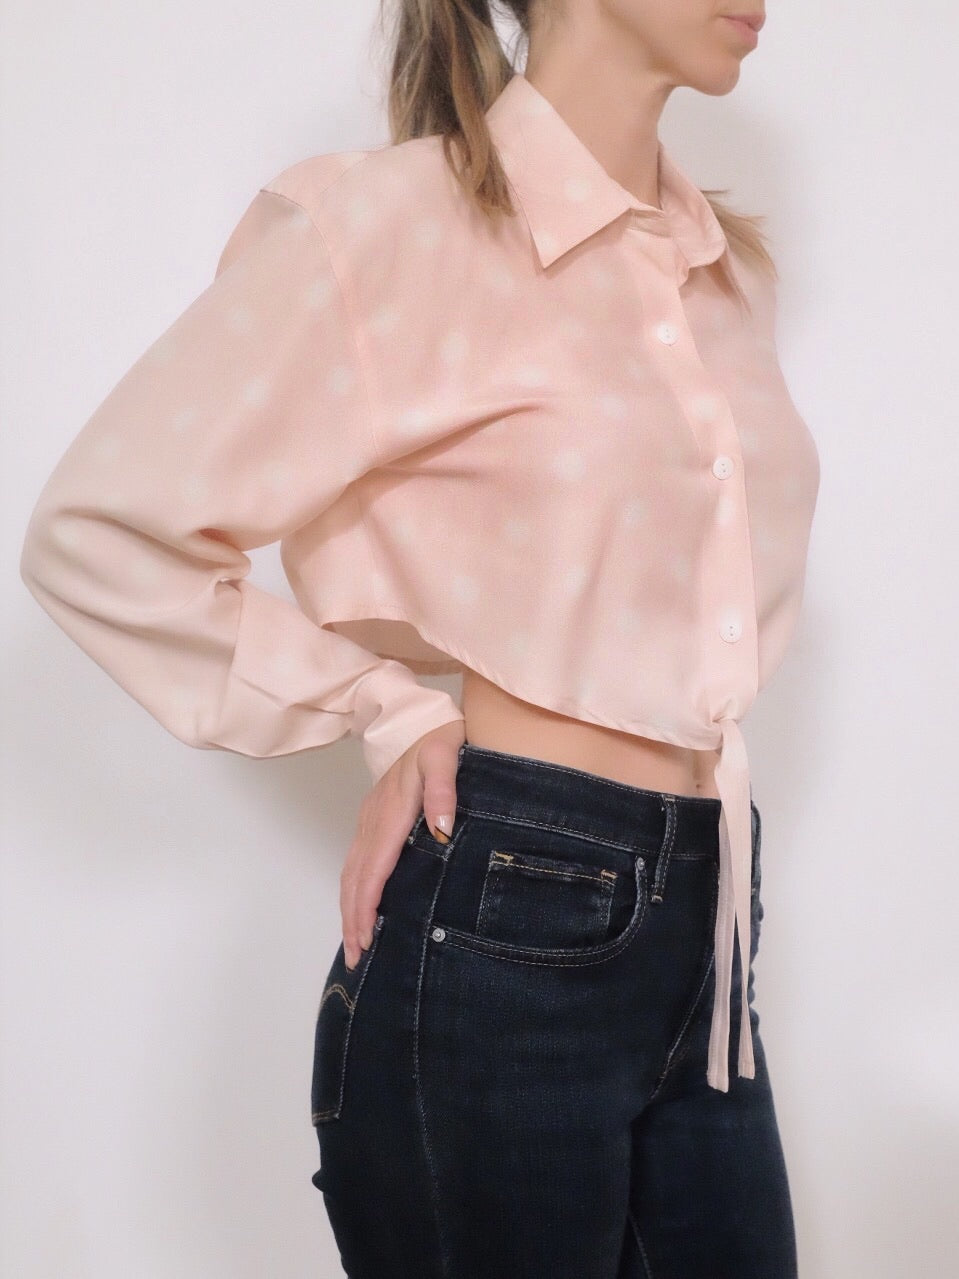 Transformed Vintage Blouse - Cropped, Tie Front Oversized Top - Size Large